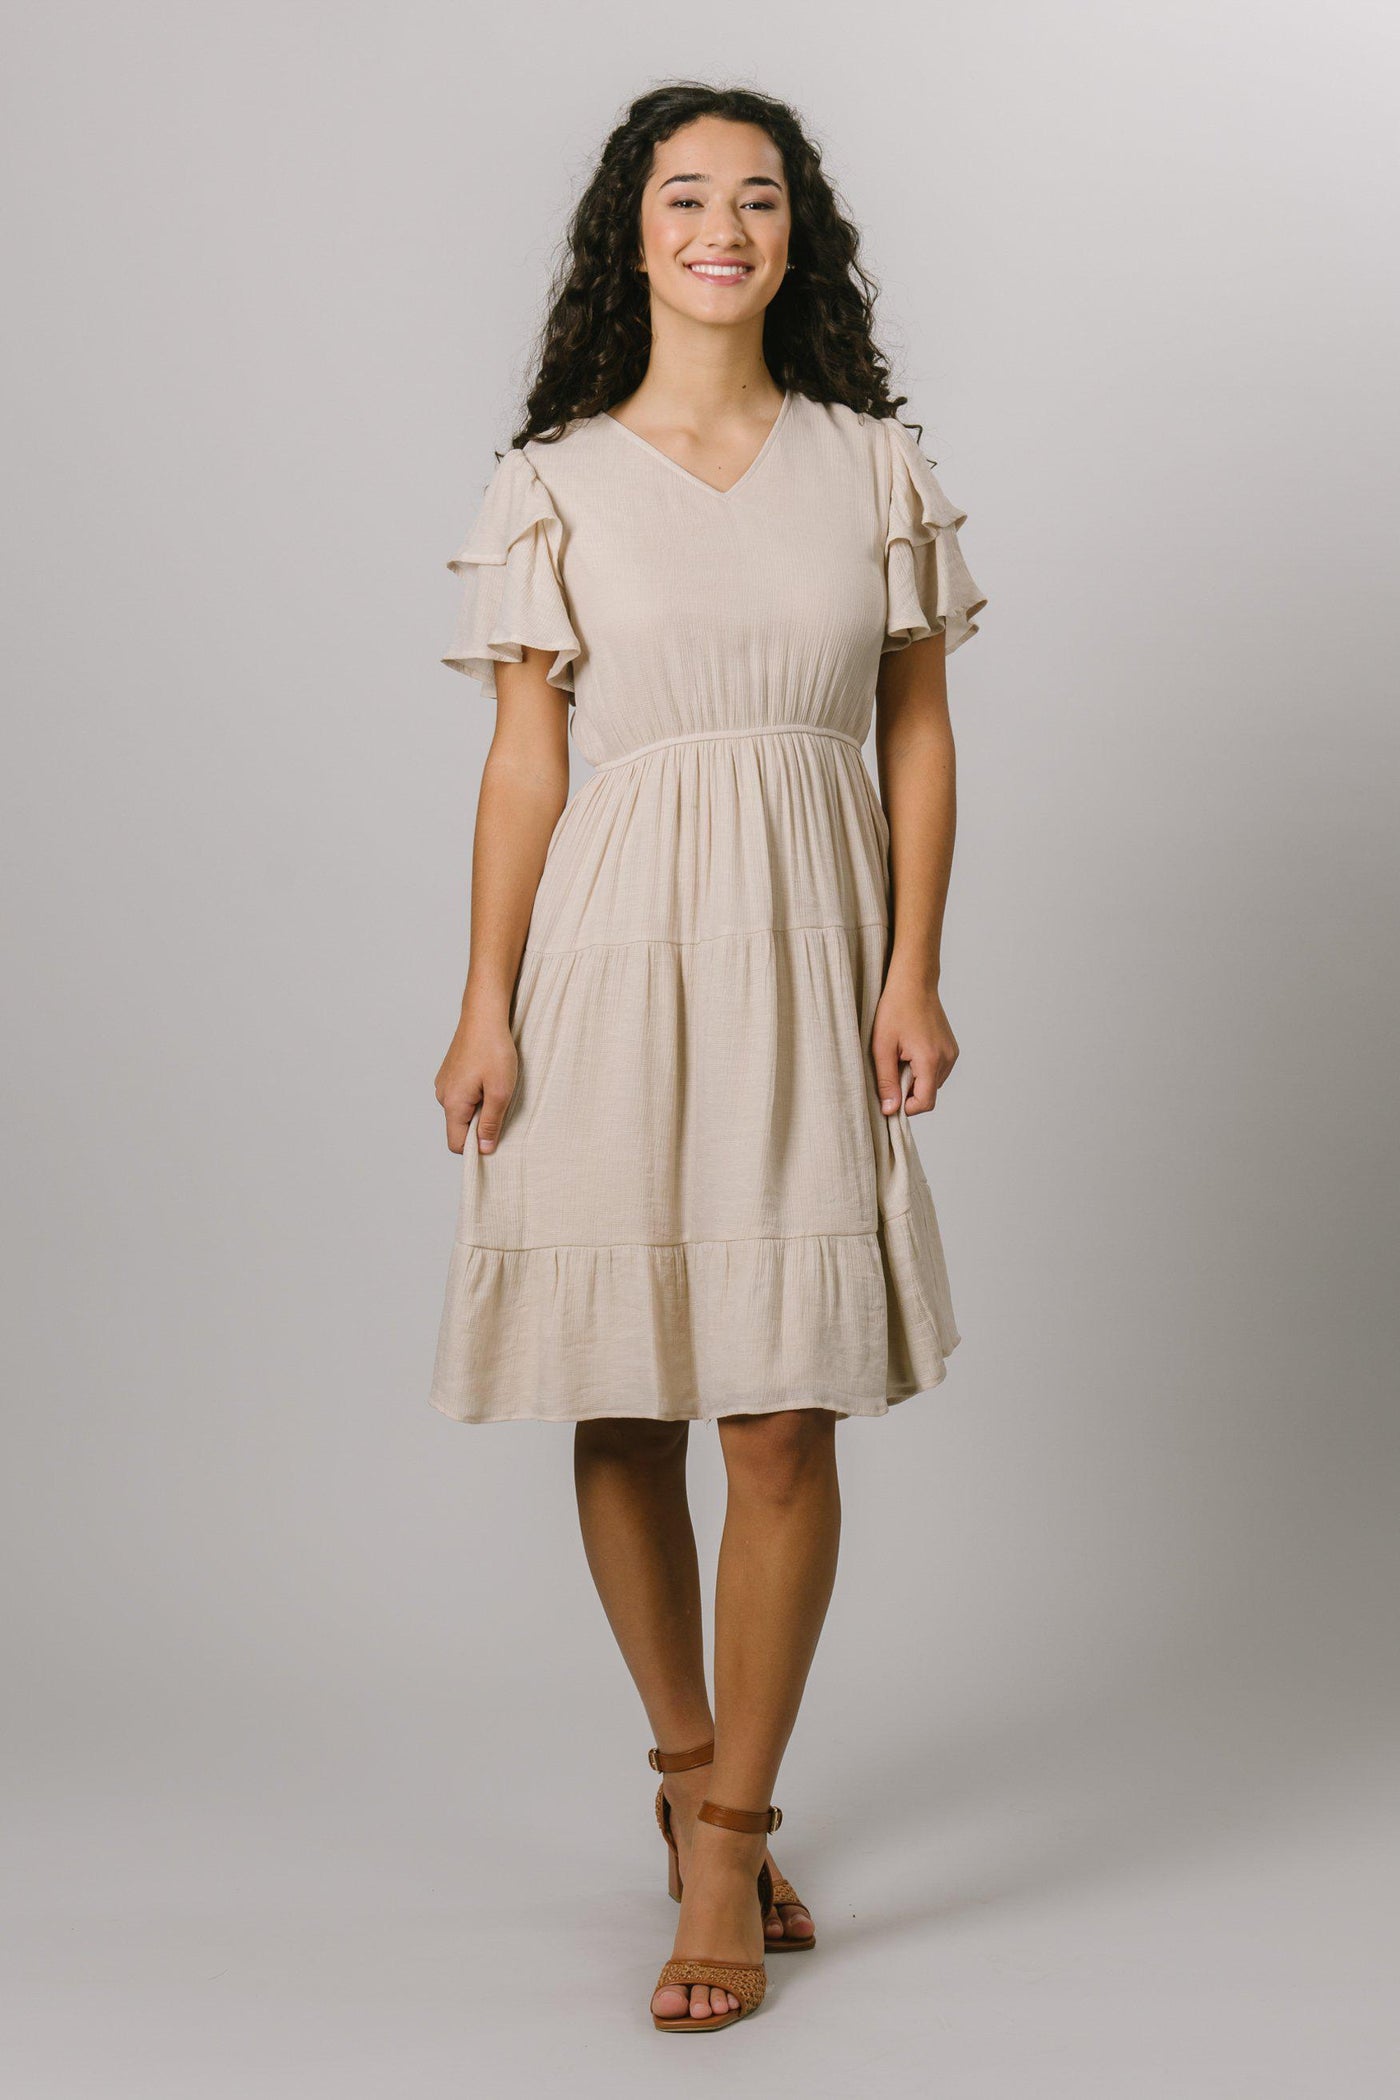 Our modest v-neck everyday dress features a layered flutter sleeve and a tiered textured pattern in pearl. Modest Dresses - Modest Clothing - Everyday Modest Dresses - Bridesmaid Modest Dresses.